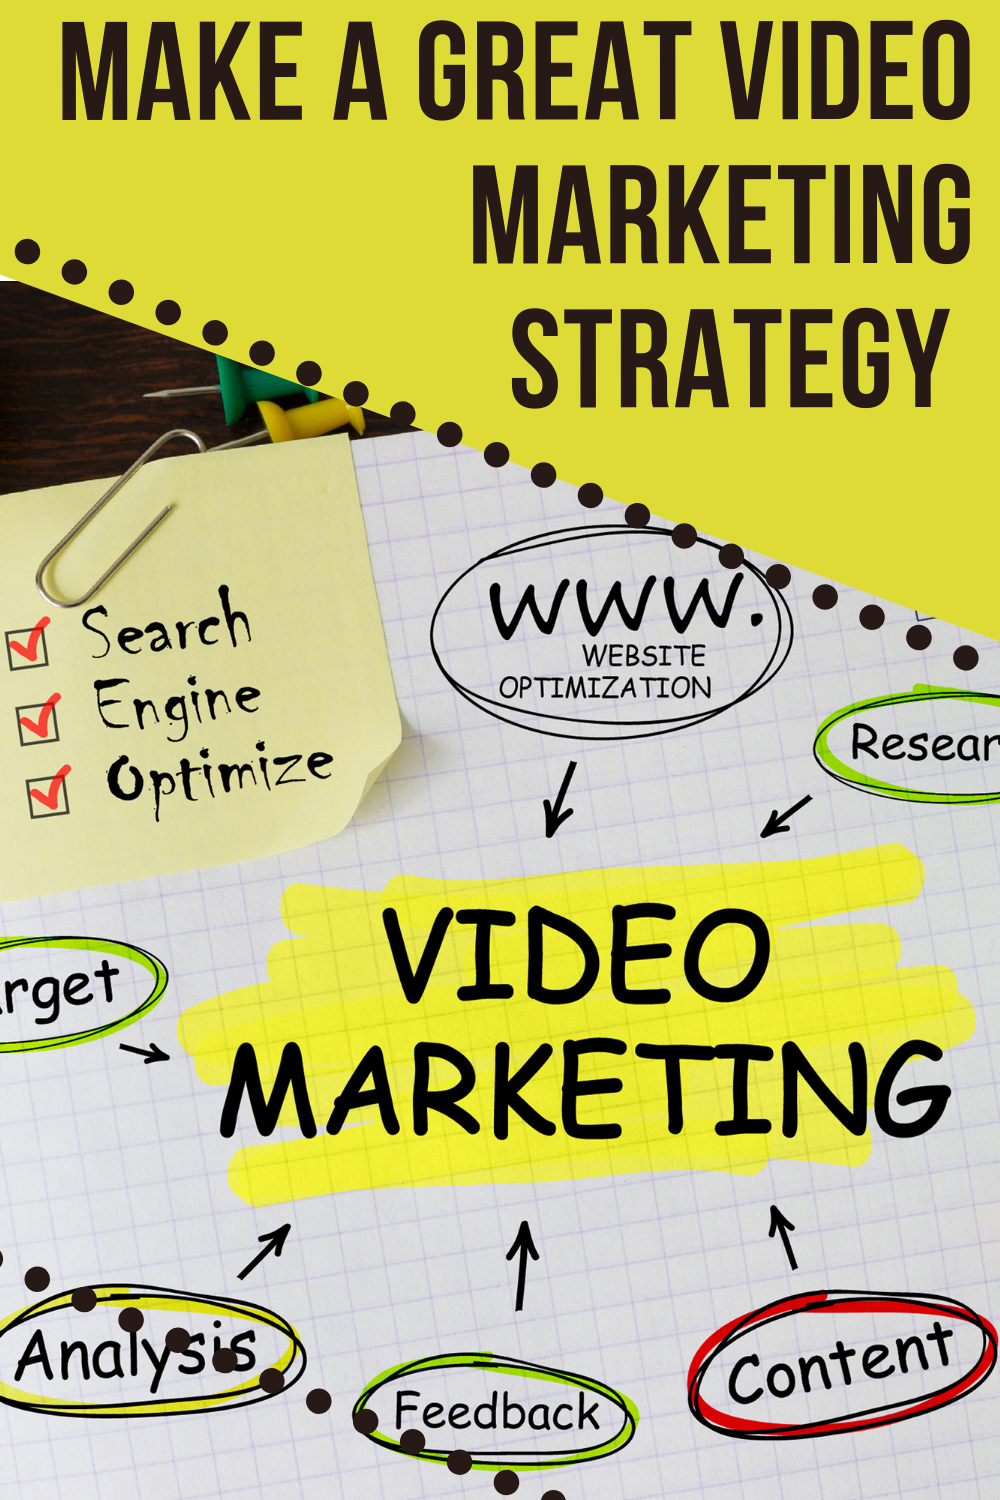 Video marketing: a strategy you should apply